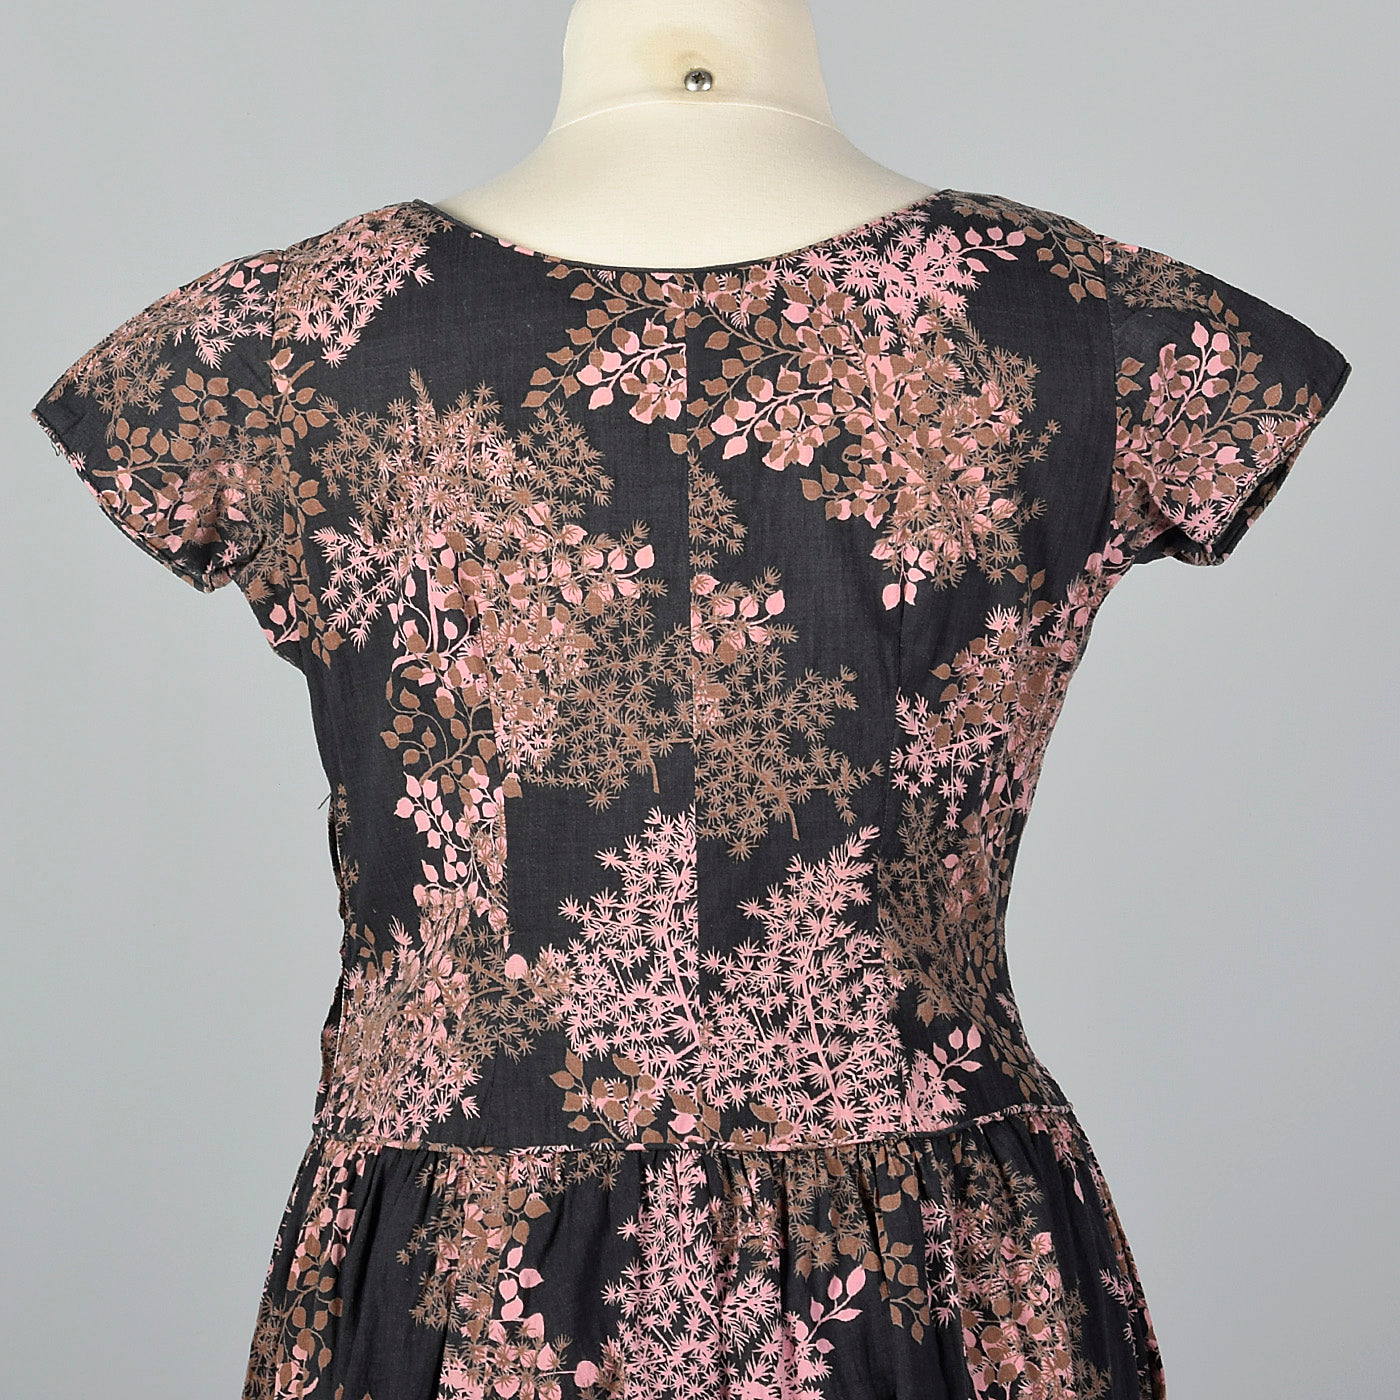 1950s Black and Pink Floral Dress with Drop Waist